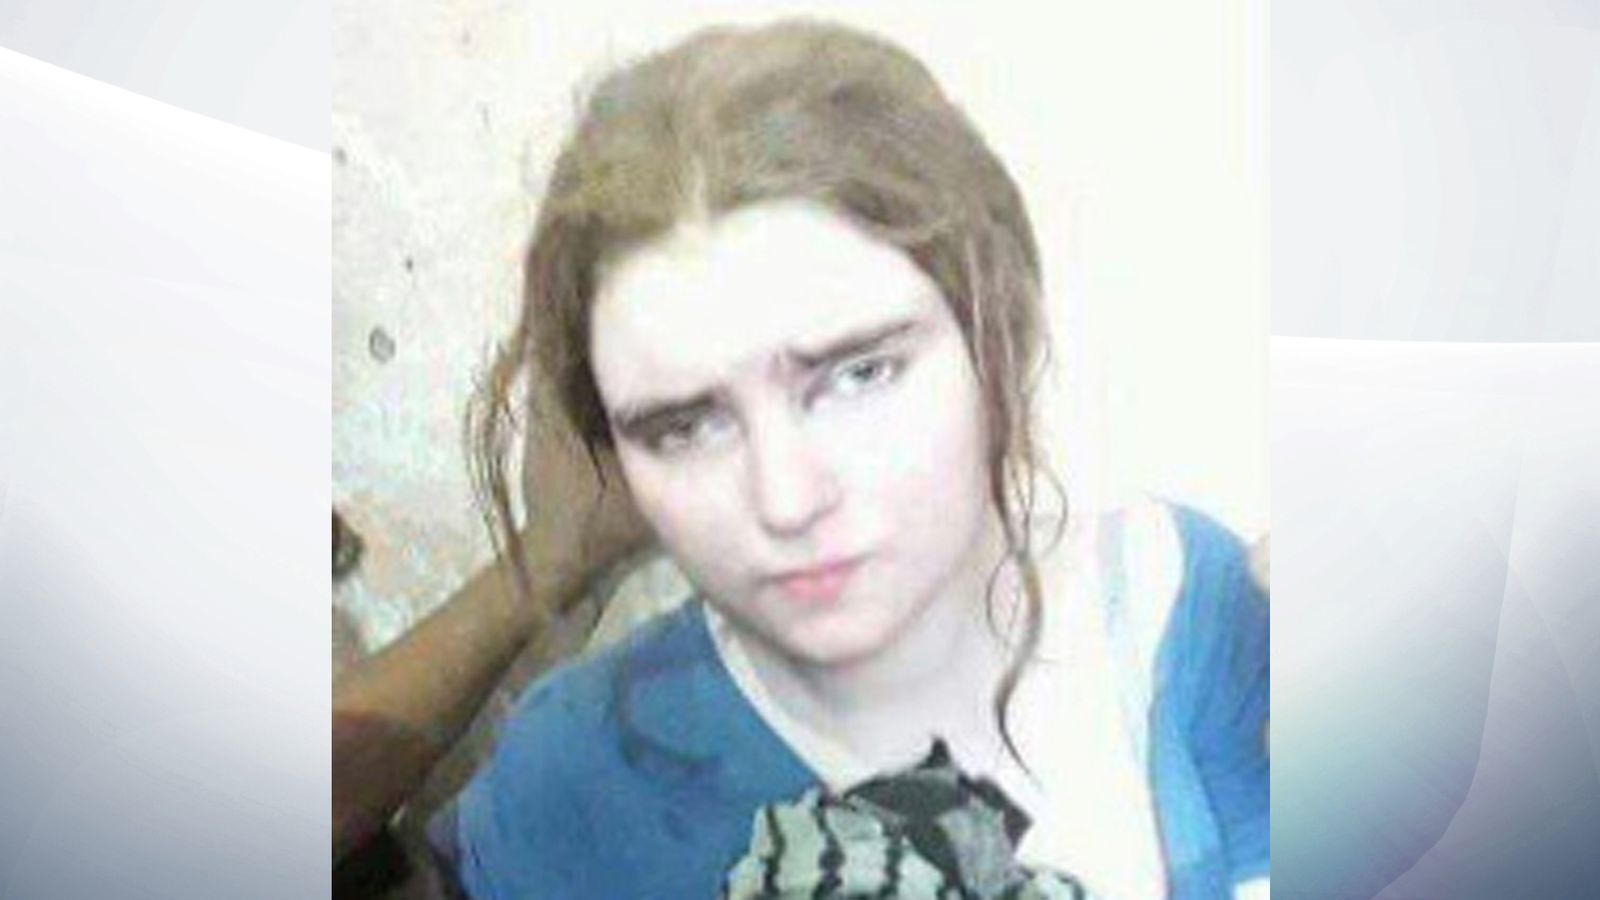 German Girl 16 Reportedly Arrested In Mosul For Suppo